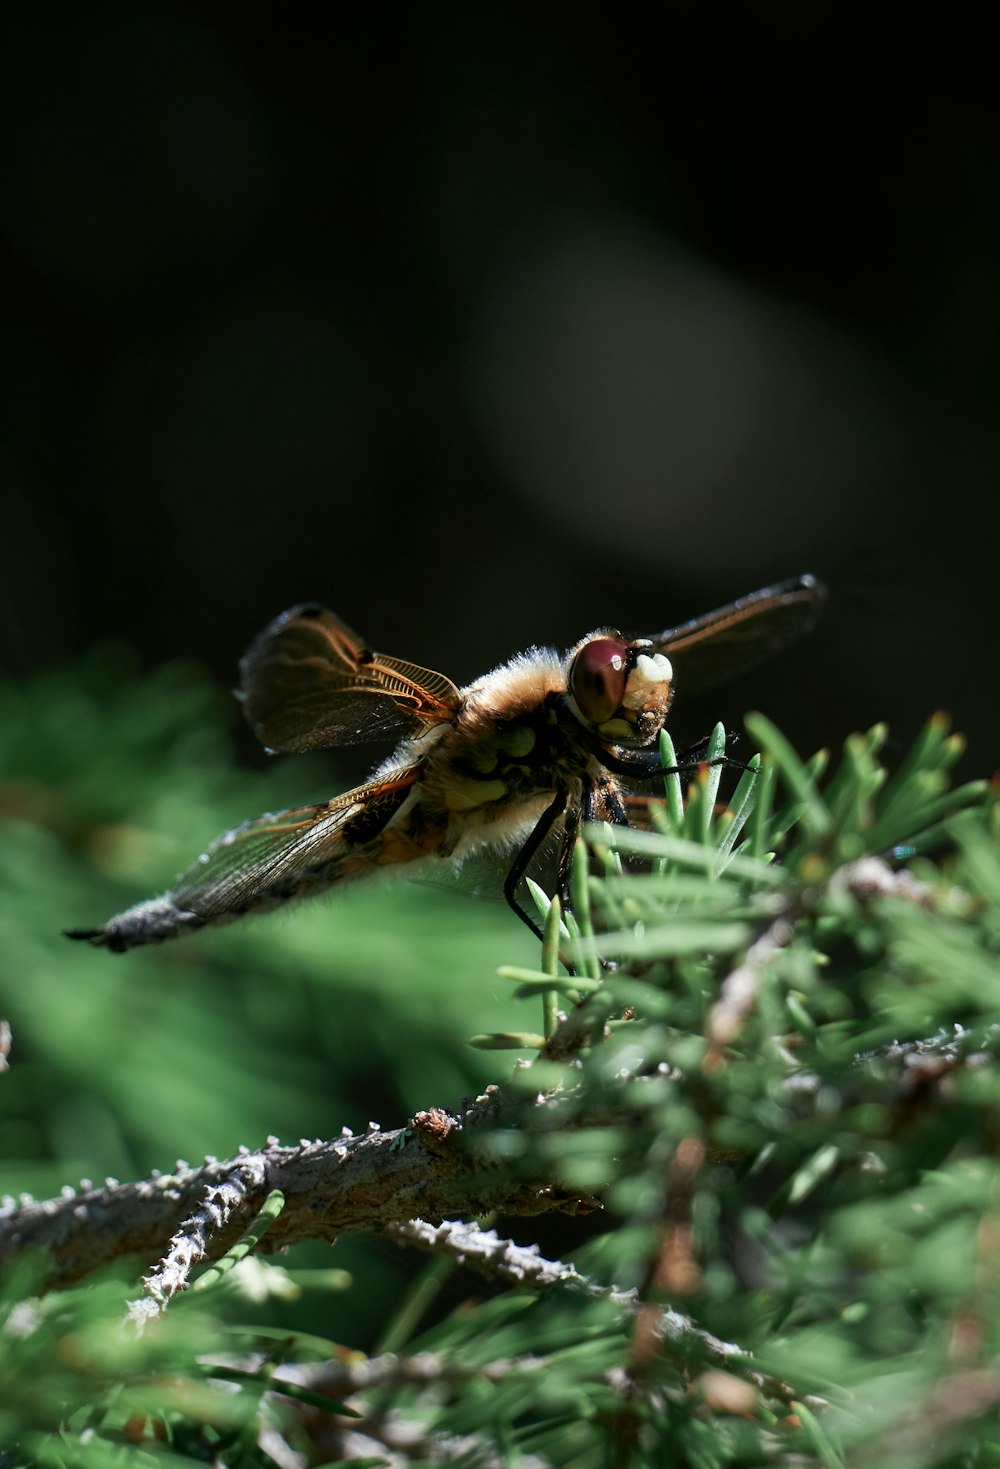 a close up of a dragon fly on a tree branch